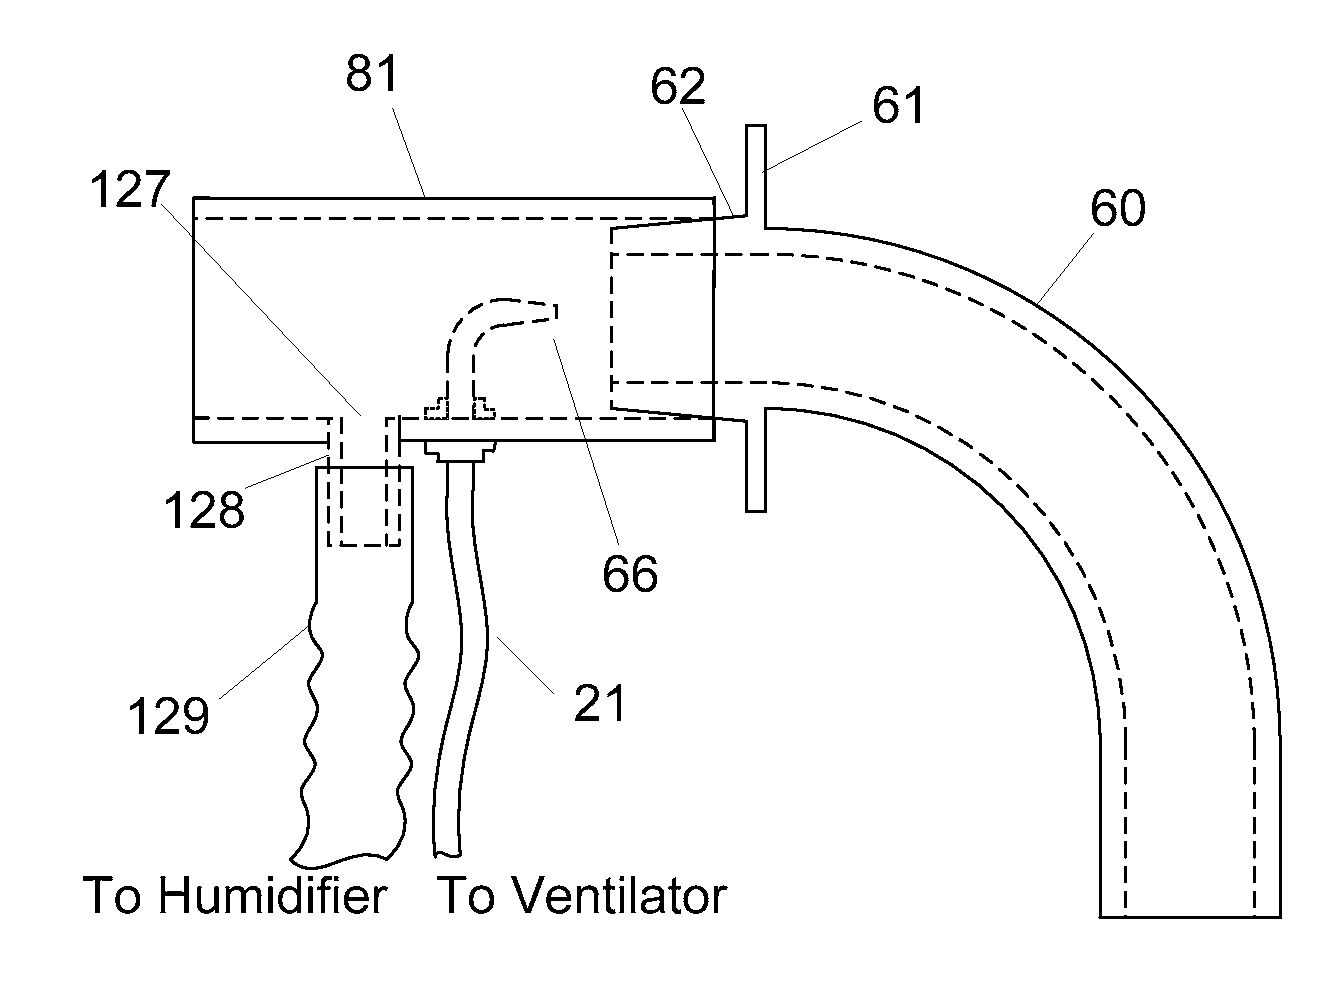 Methods and devices for providing mechanical ventilation with an open airway interface